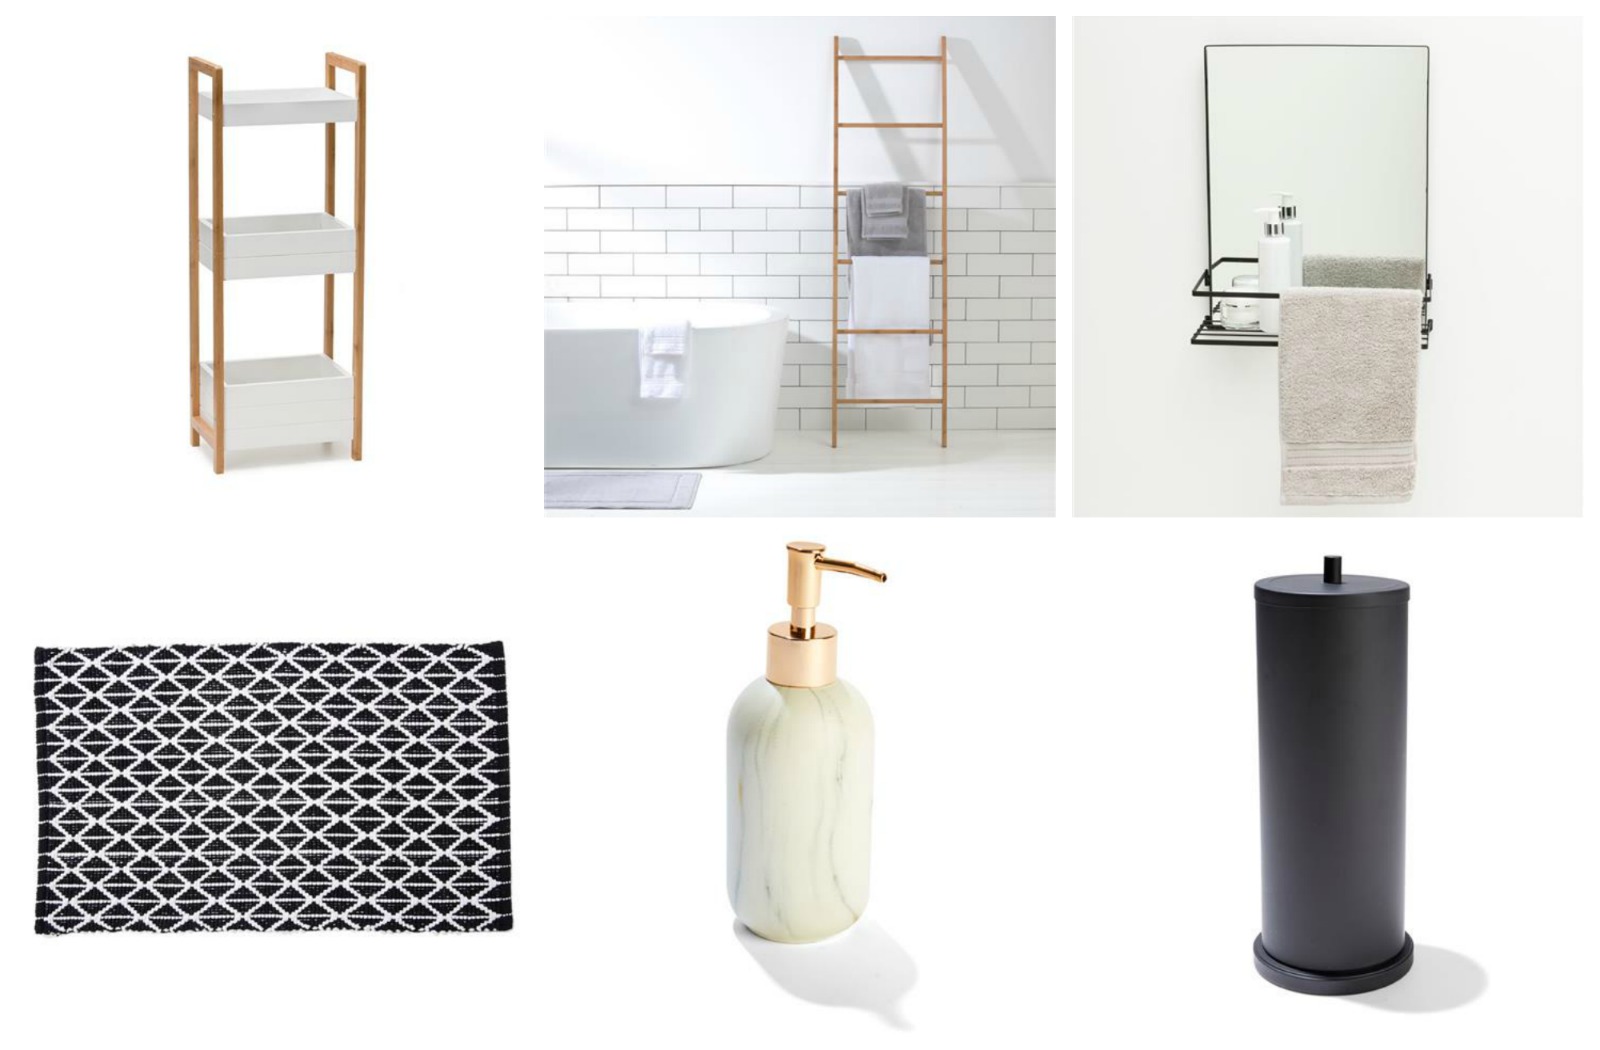 kmart toilet roll holder Cheap and chic bathroom accessories and storage from kmart